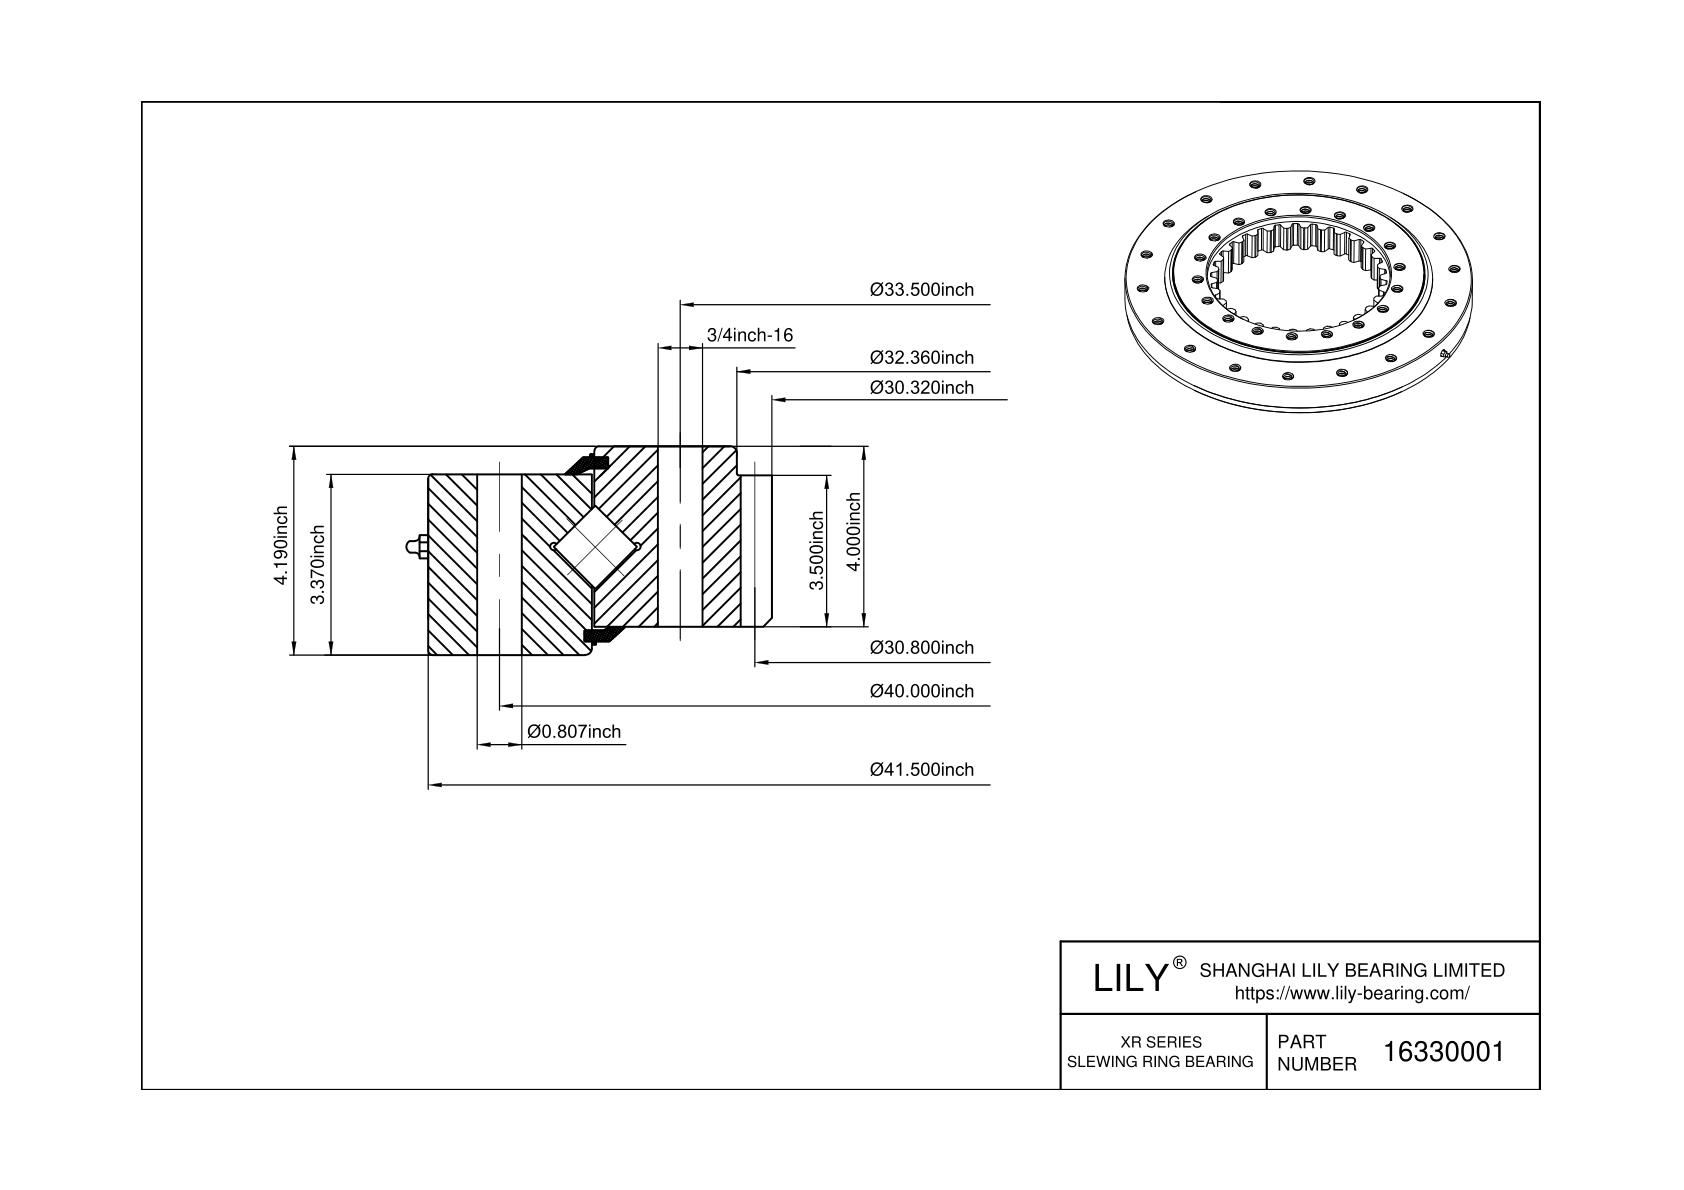 16330001 XR Series cad drawing